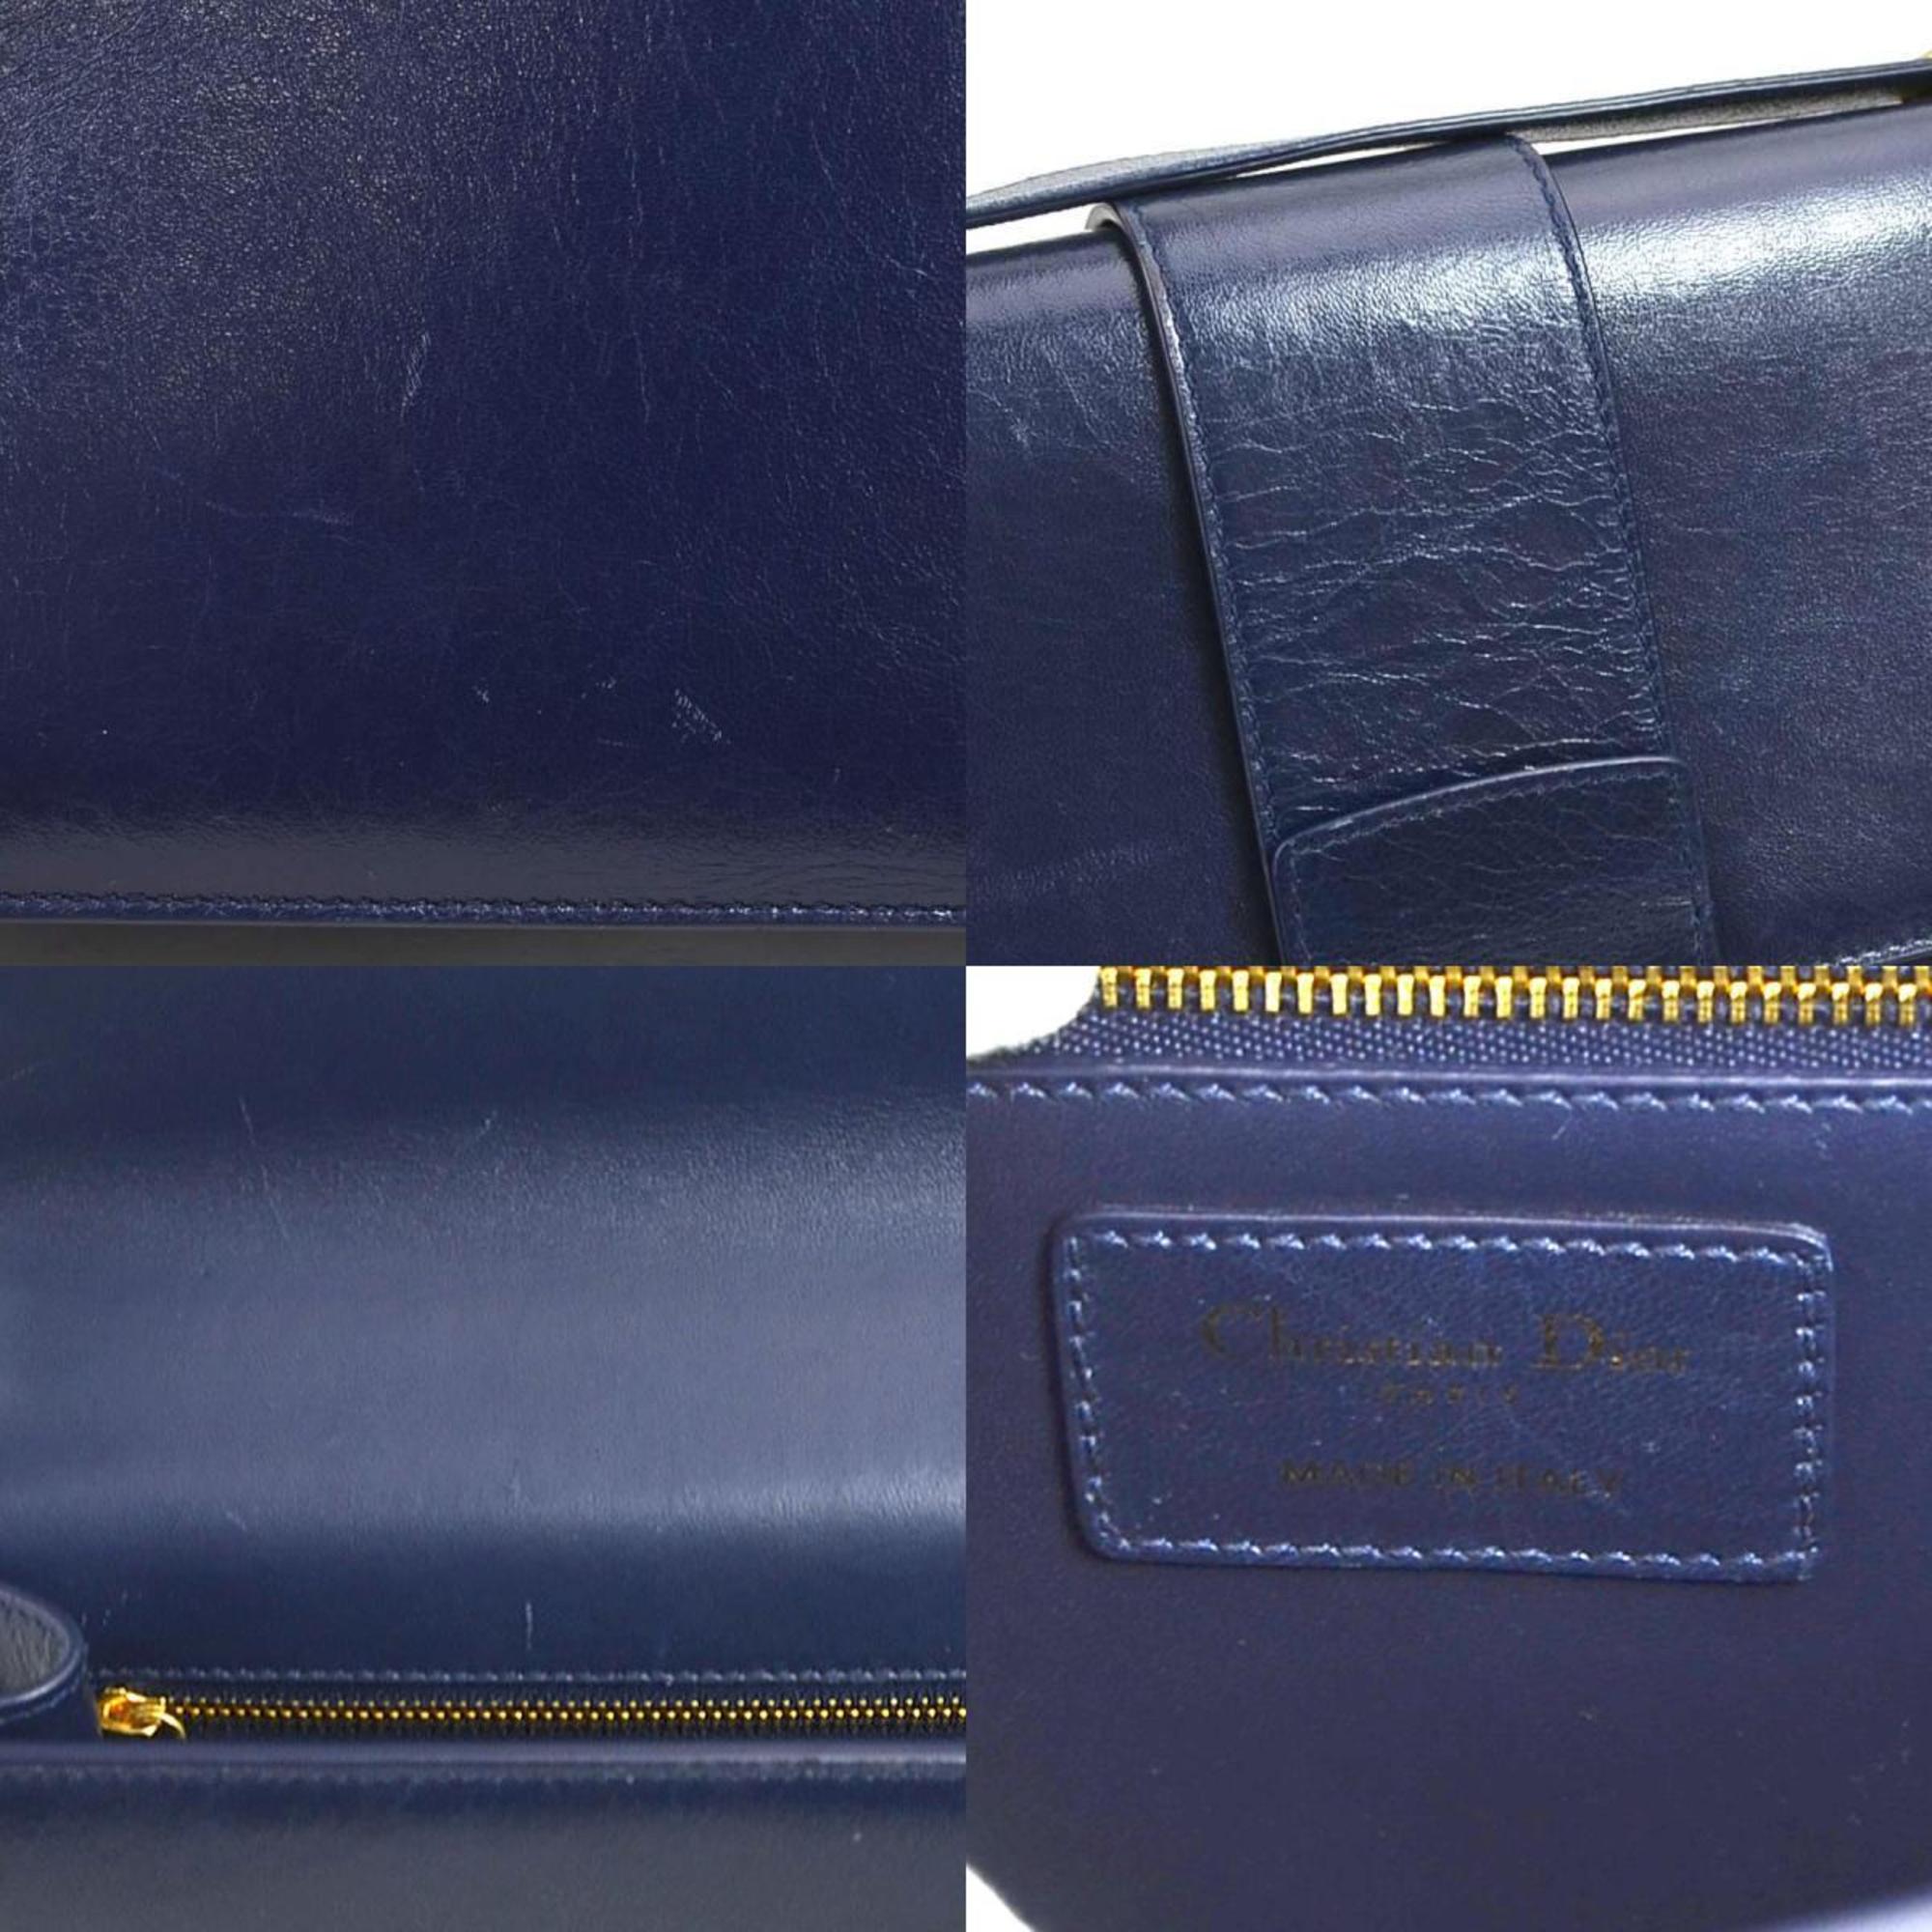 Christian Dior Shoulder Bag 30 Montaigne Leather Navy Women's a0350